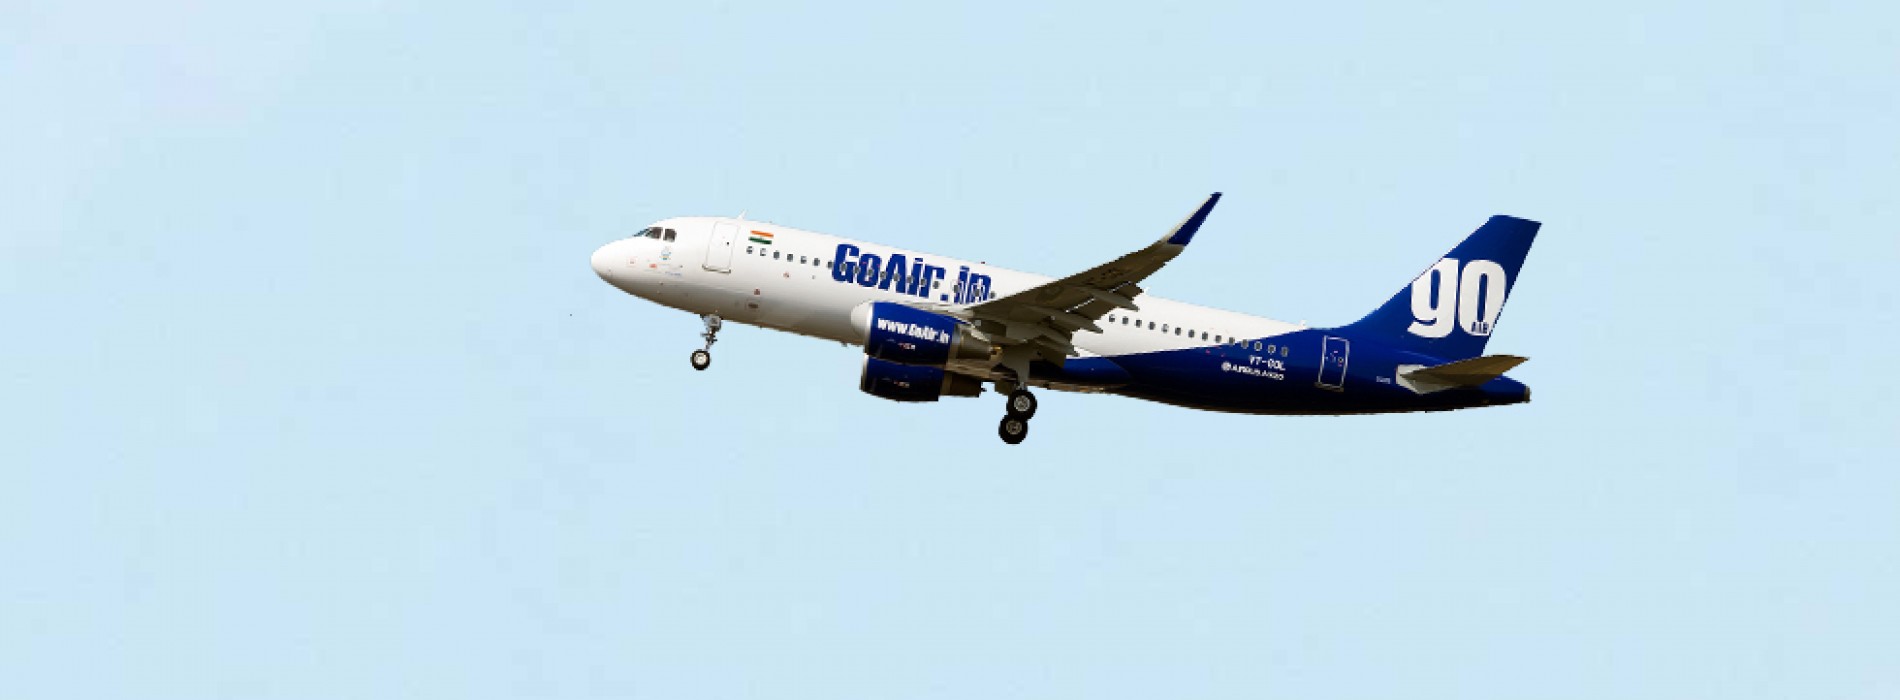 GoAir launches the “12” fare promotion celebrating the 12th Anniversary